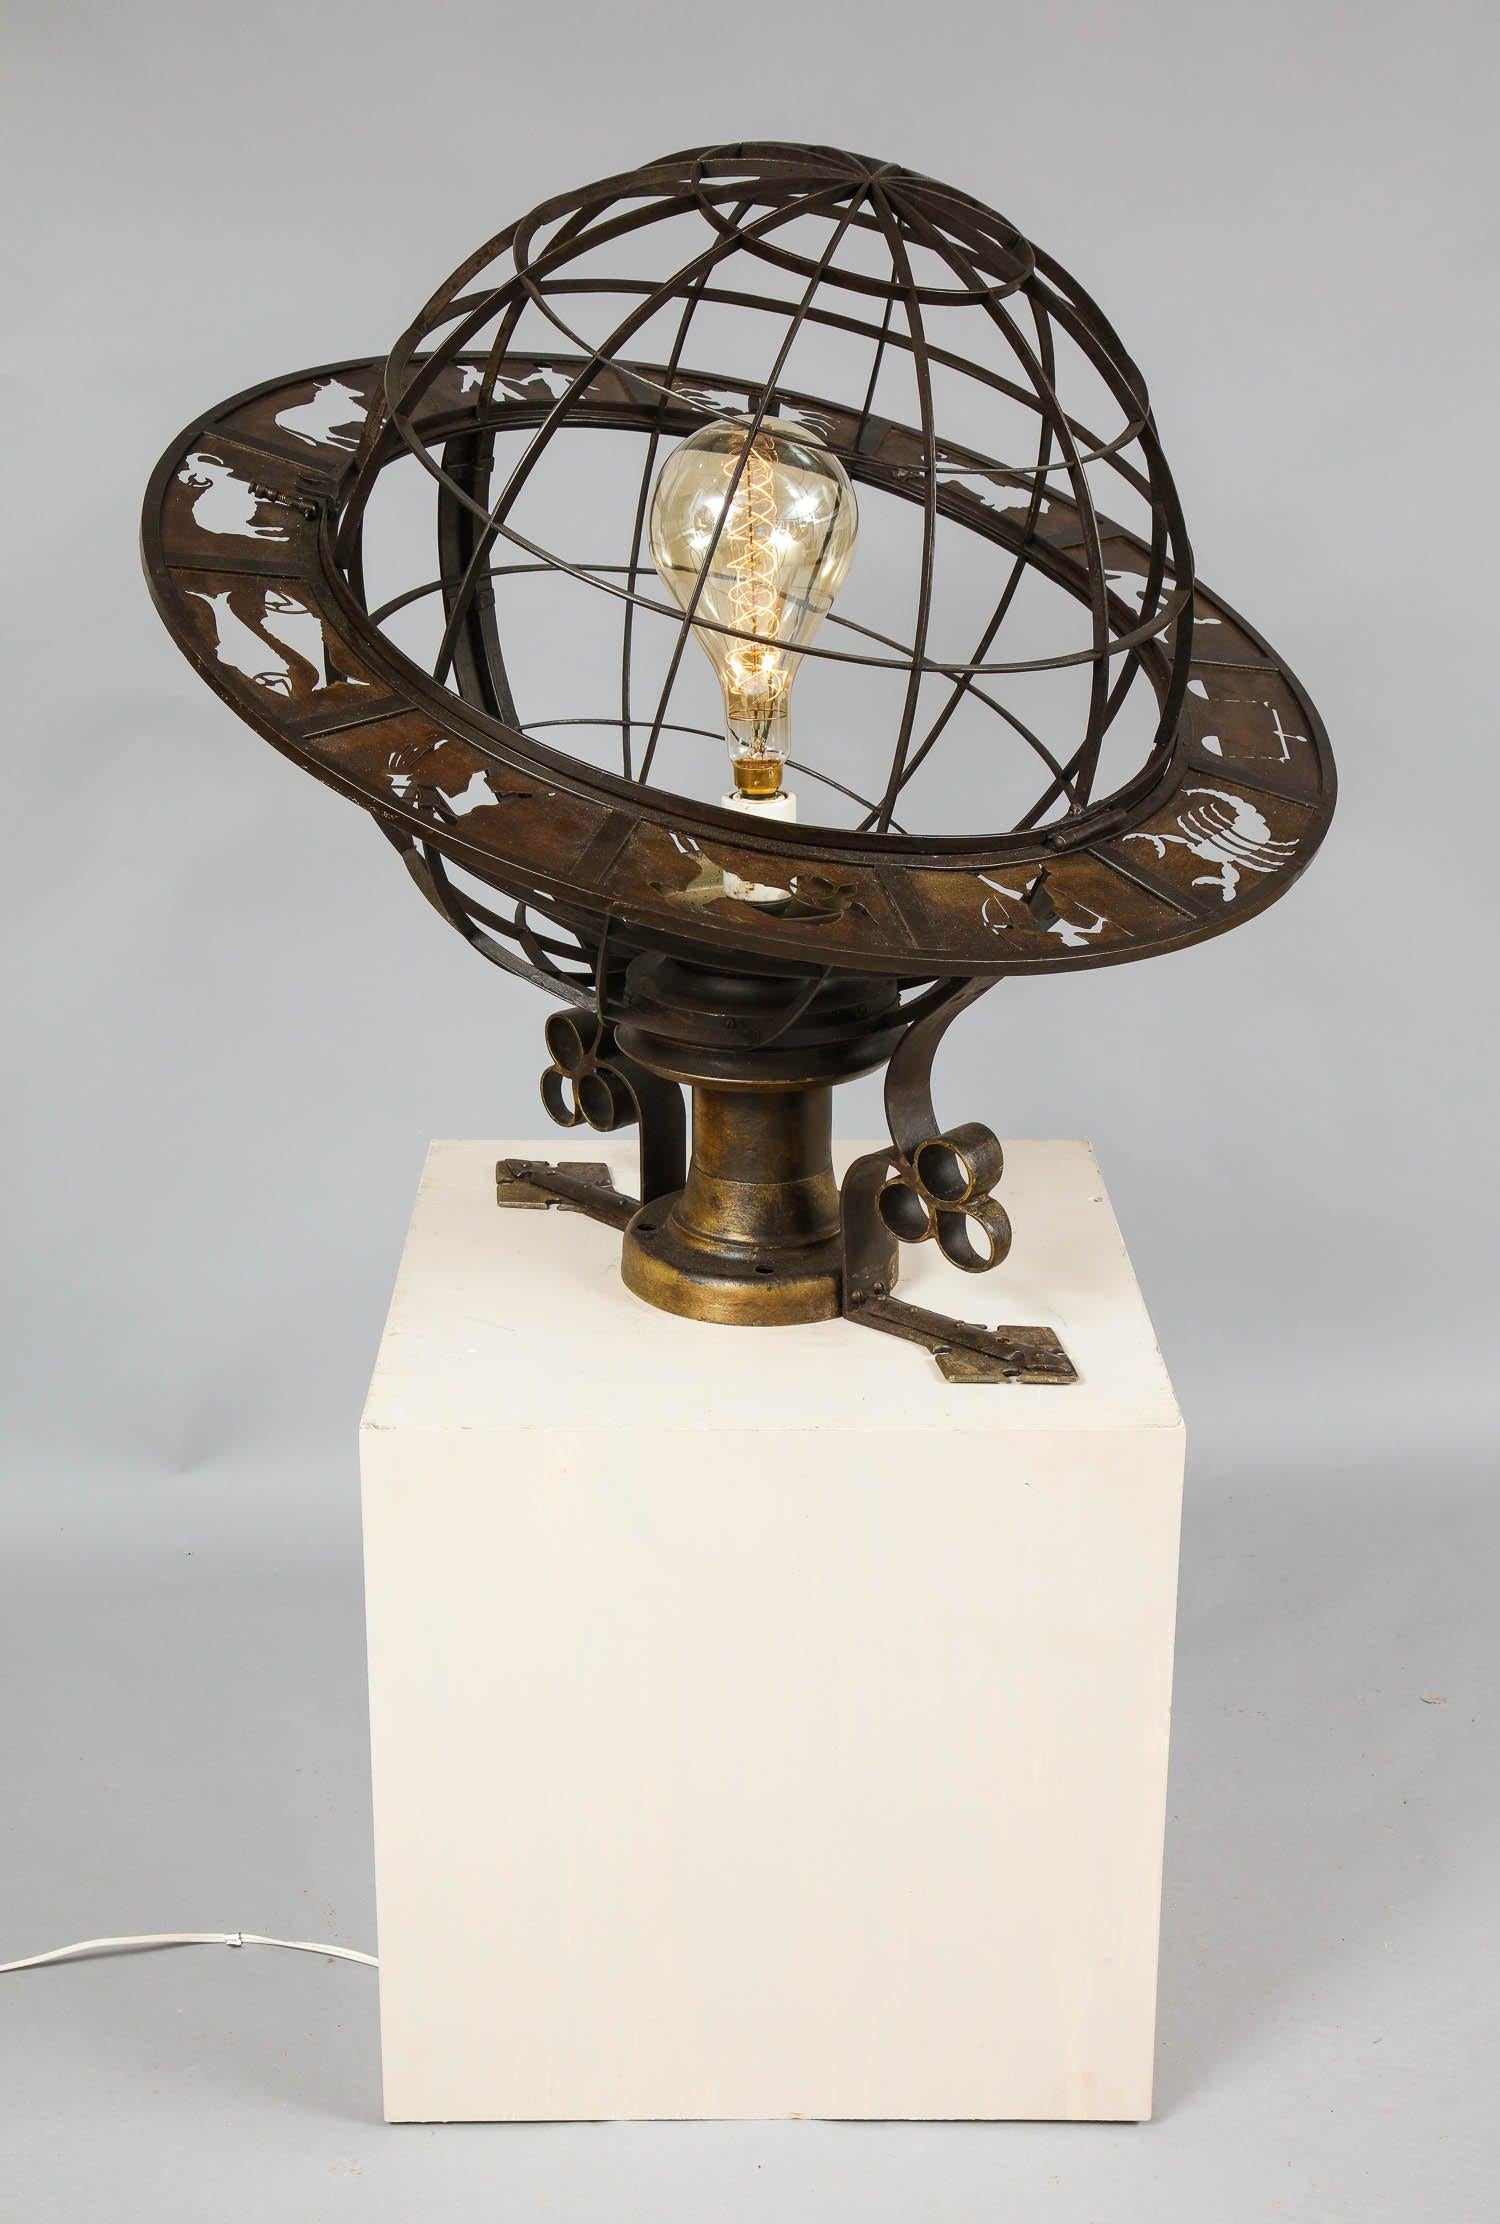 Unusual American wrought iron and bronze light fixture in the form of a globe with Zodiac ring in pierced bronze probably designed by Cass Gilbert and made for the Hartford CT based department store G. Fox and Co, circa 1918. The original store was